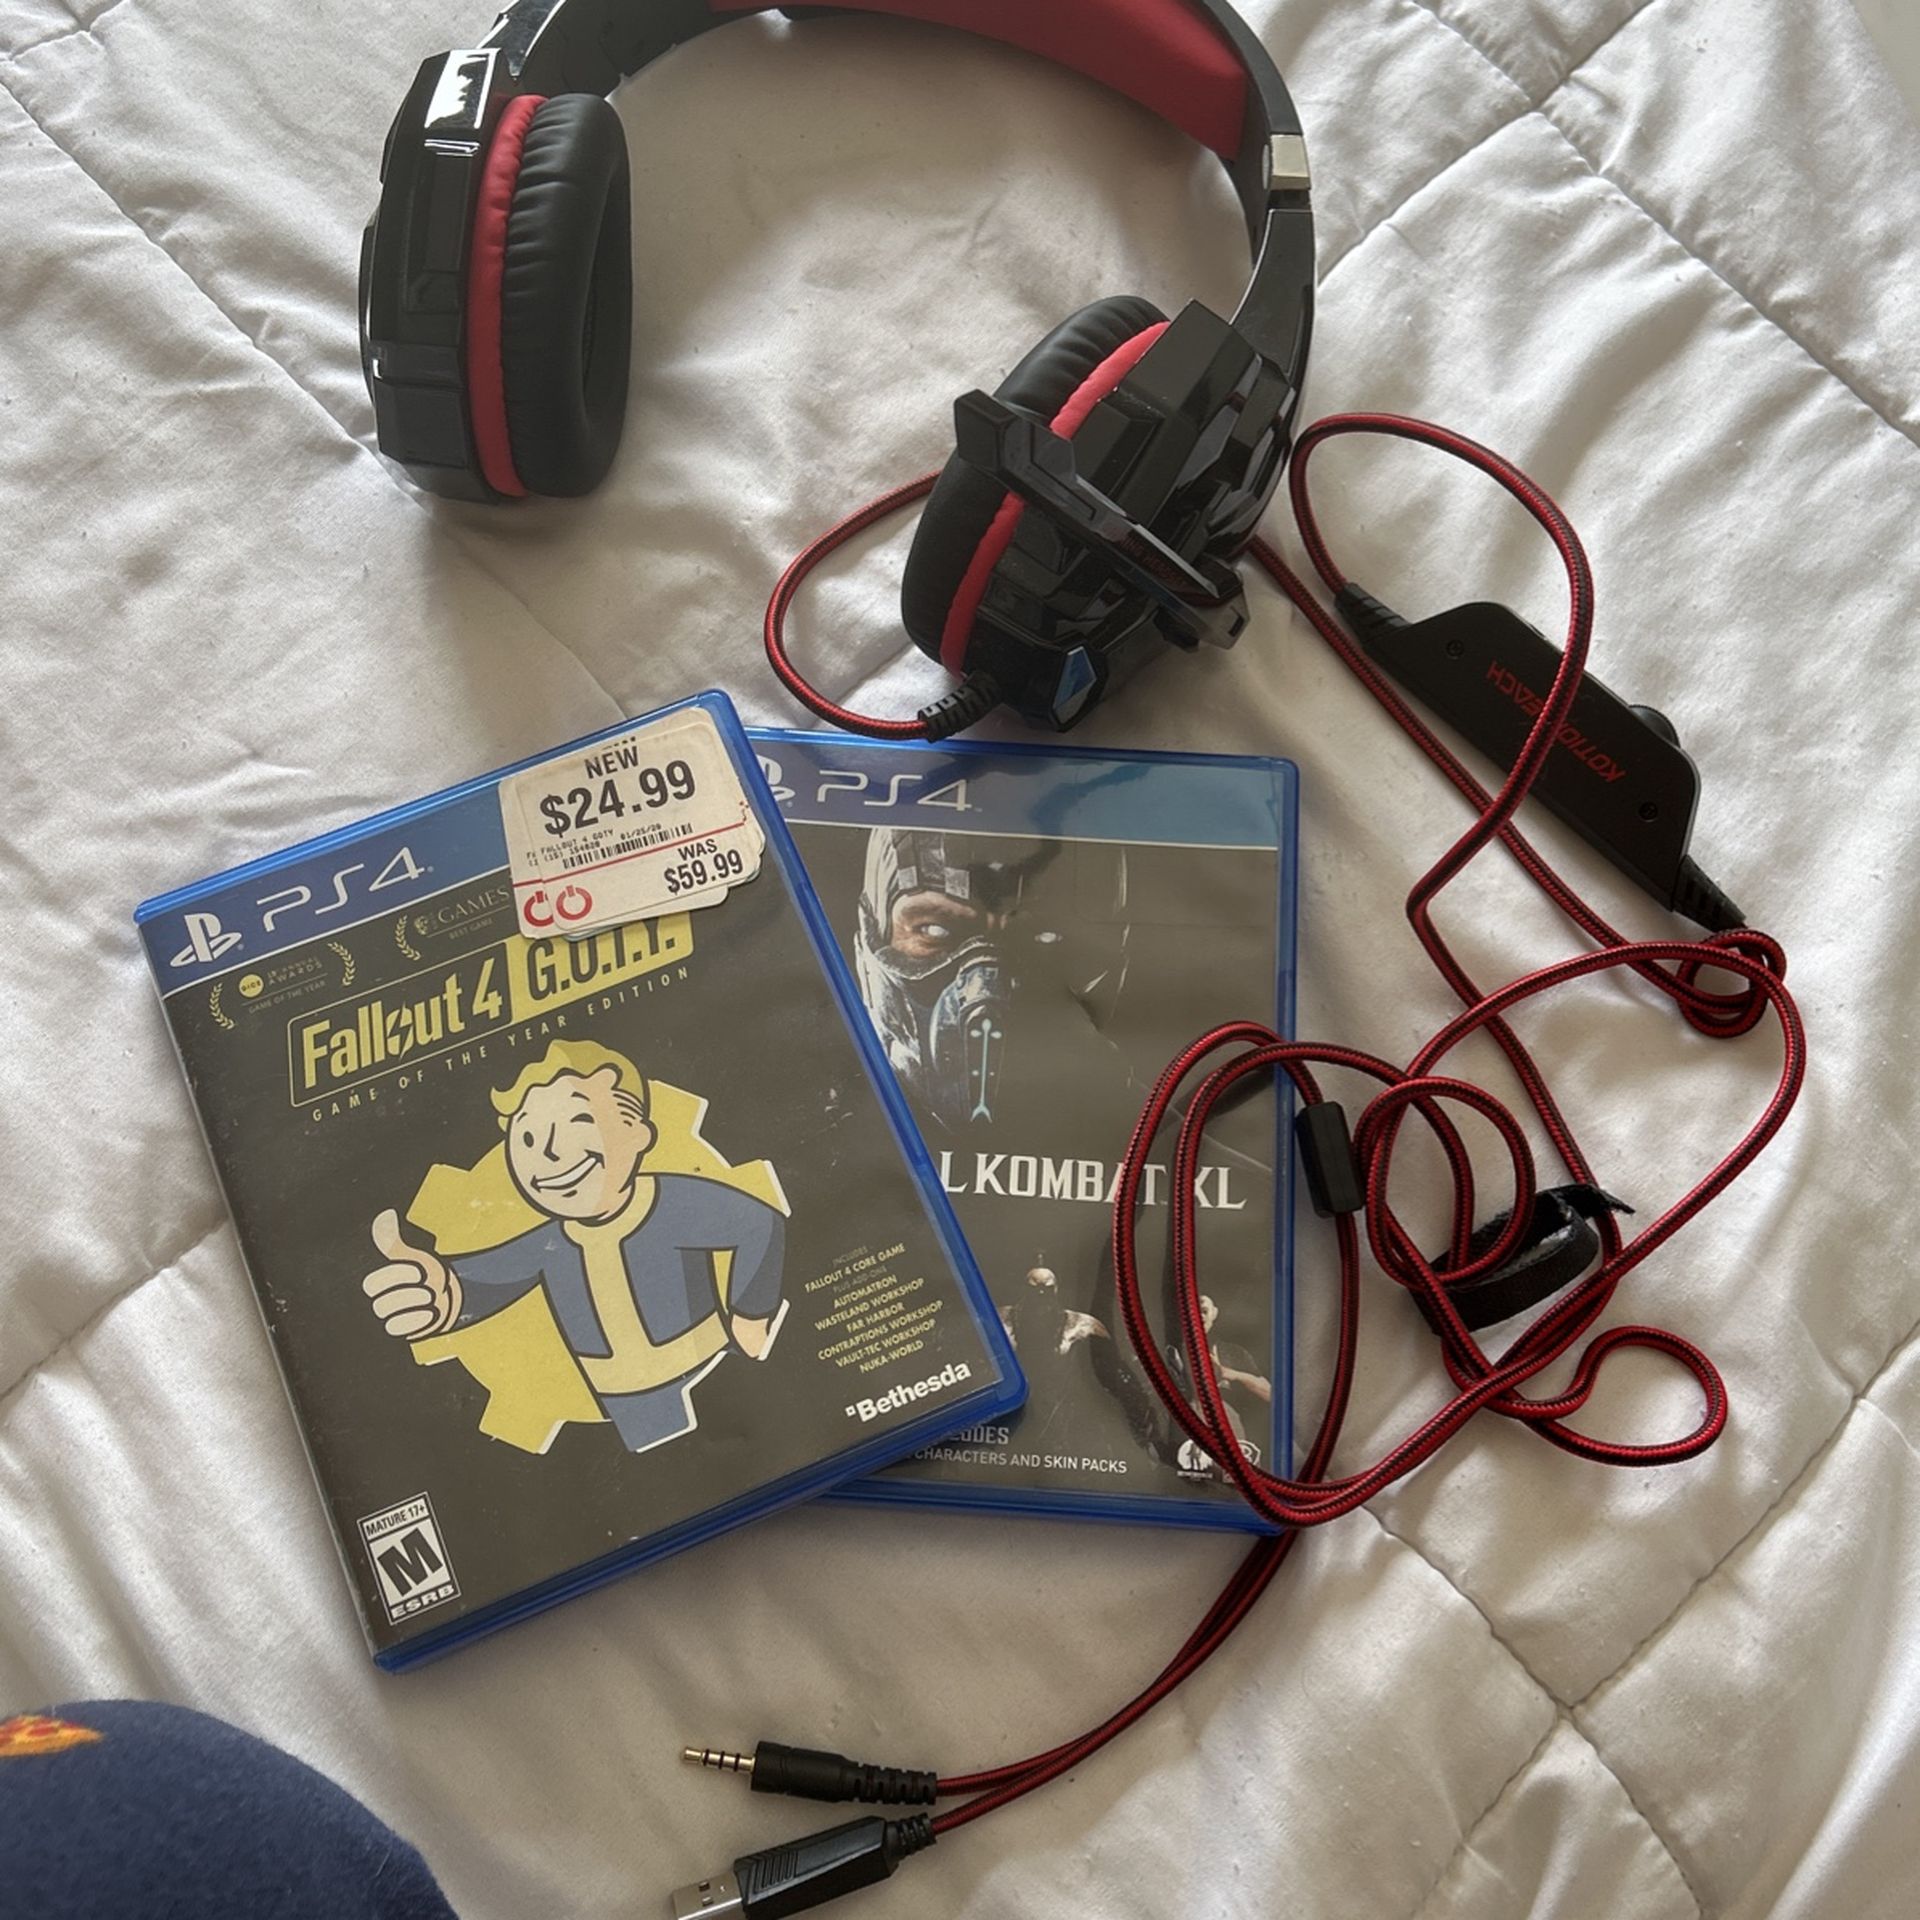 PS4 MK XL and Fallout 4 with headphones